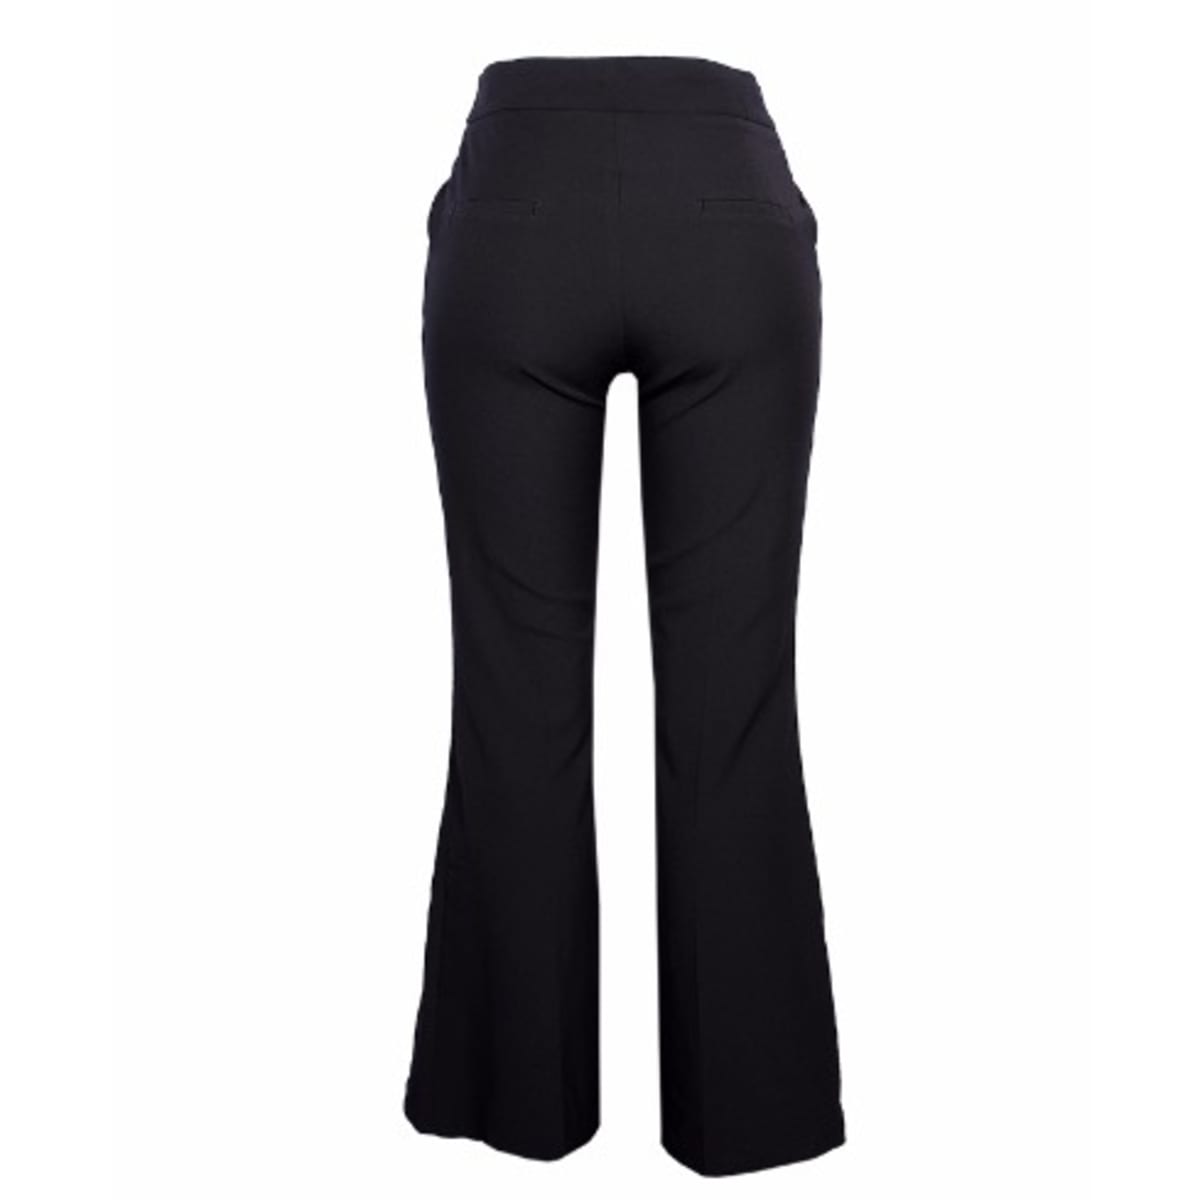 Bootcut Yoga Pants for Women Stretchy Work Business Slacks Dress Pants  Casual Straight Leg Trousers with Pockets  Walmartcom